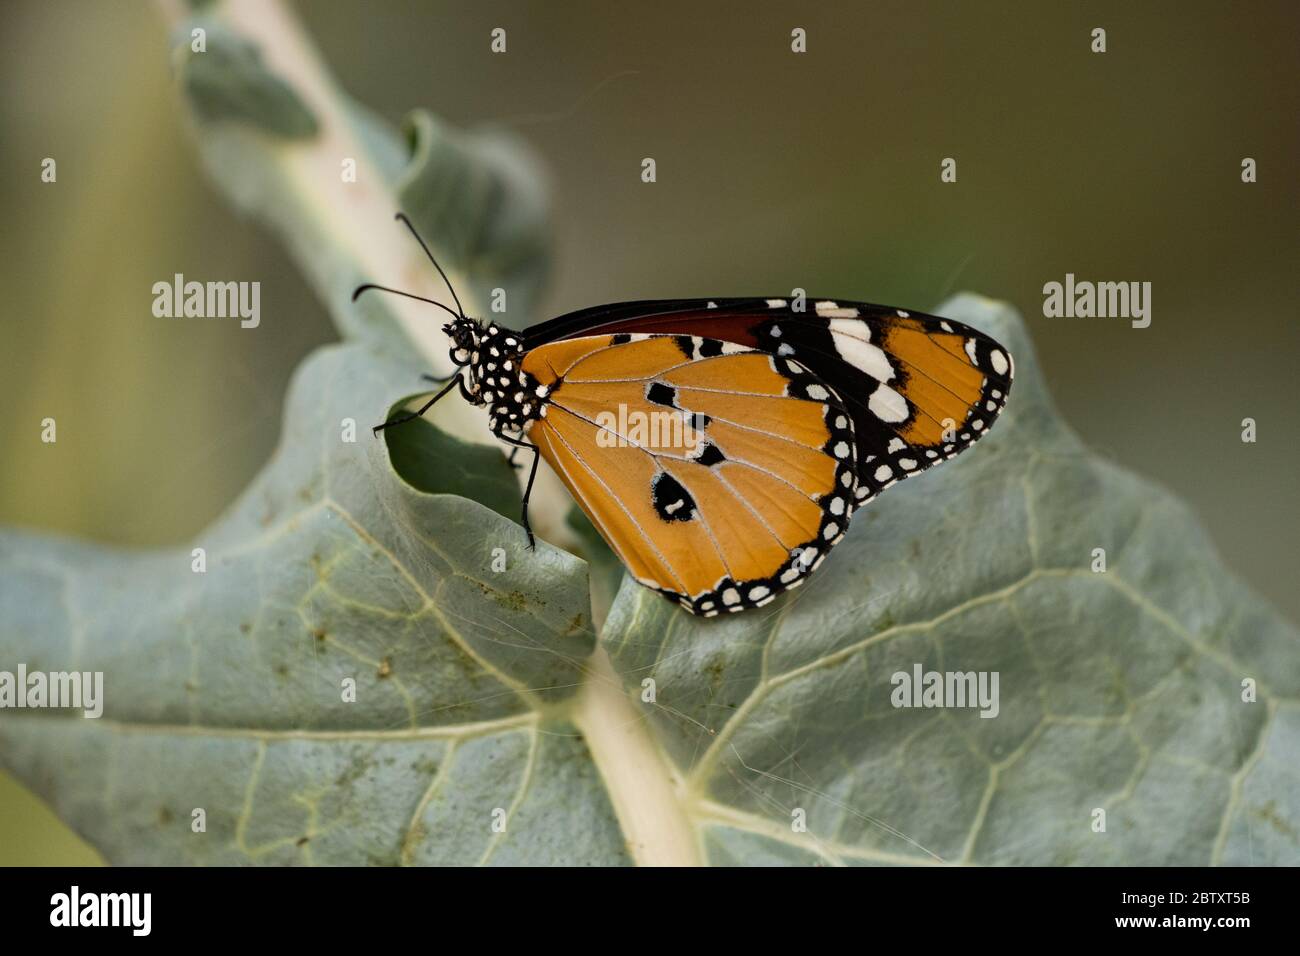 Plain Tiger (Danaus chrysippus) AKA African Monarch Butterfly on a flower Photographed in Israel, in July Stock Photo